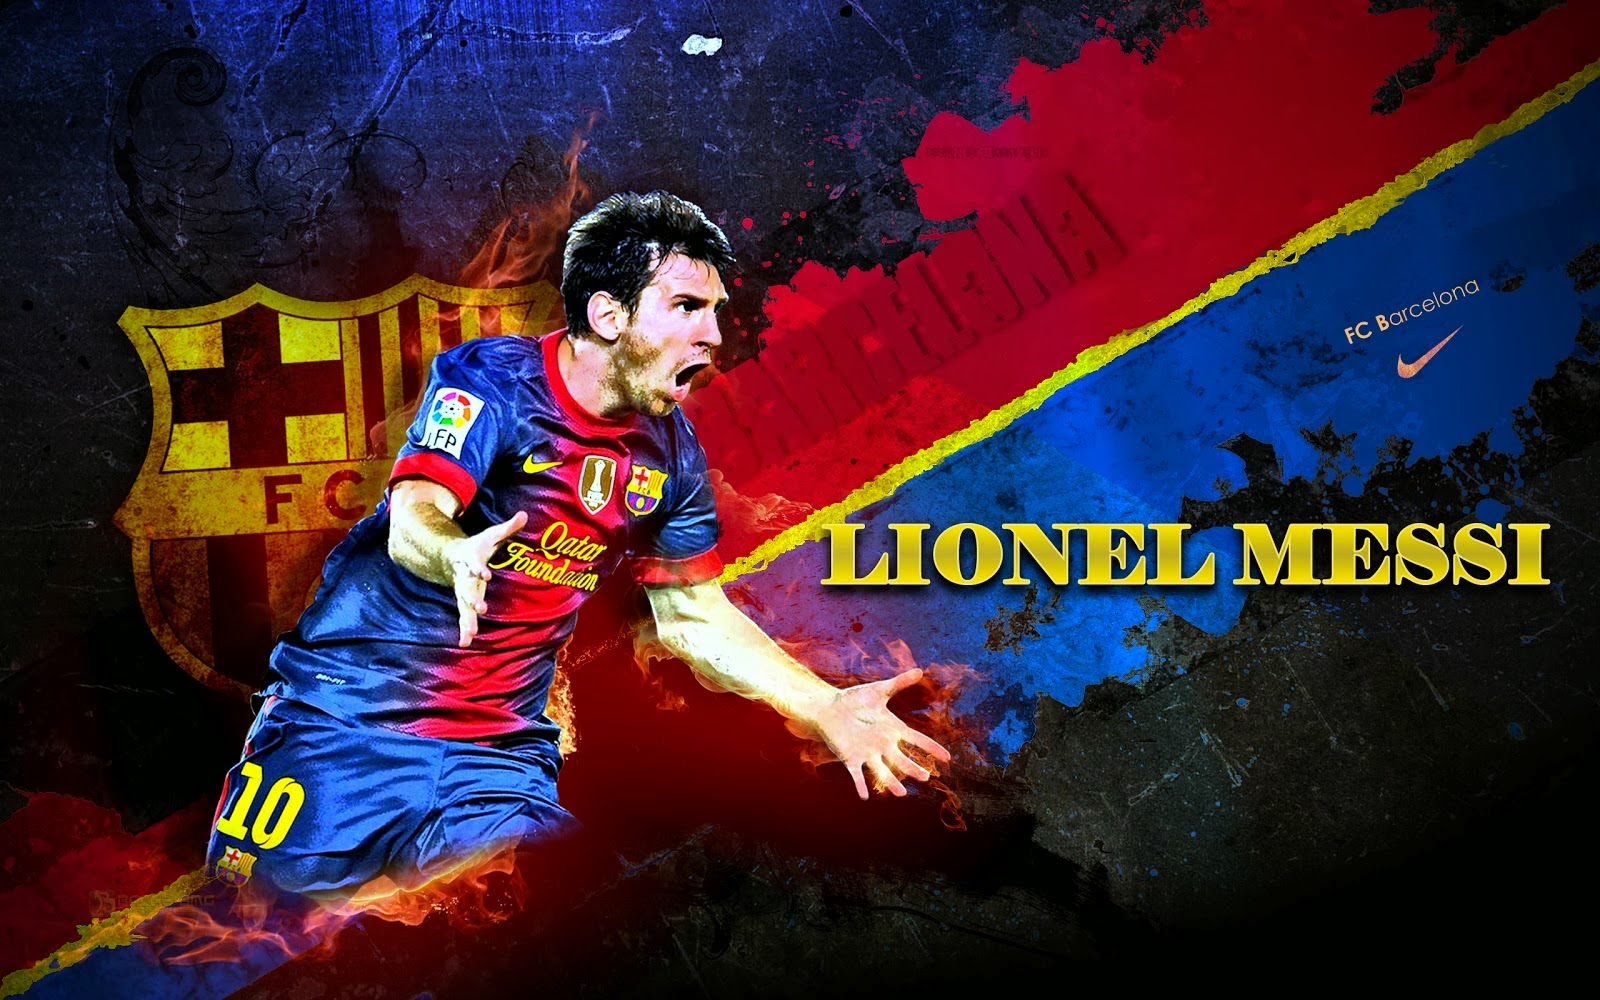 Lionel Messi 2014 HD Wallpapers Latest HD Wallpapers